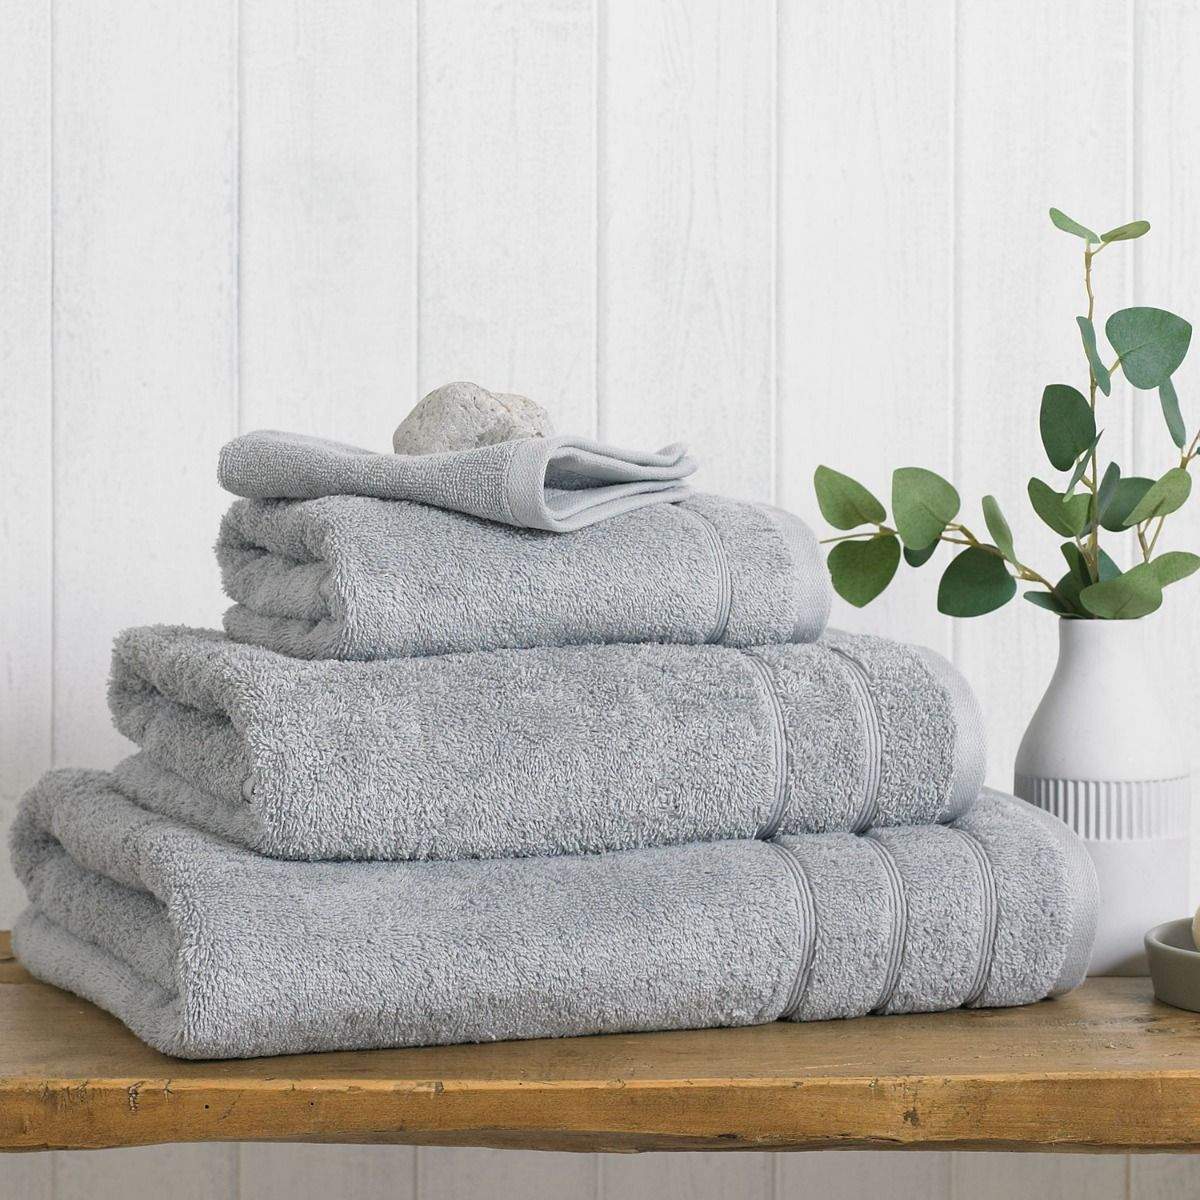 Towels For Spa